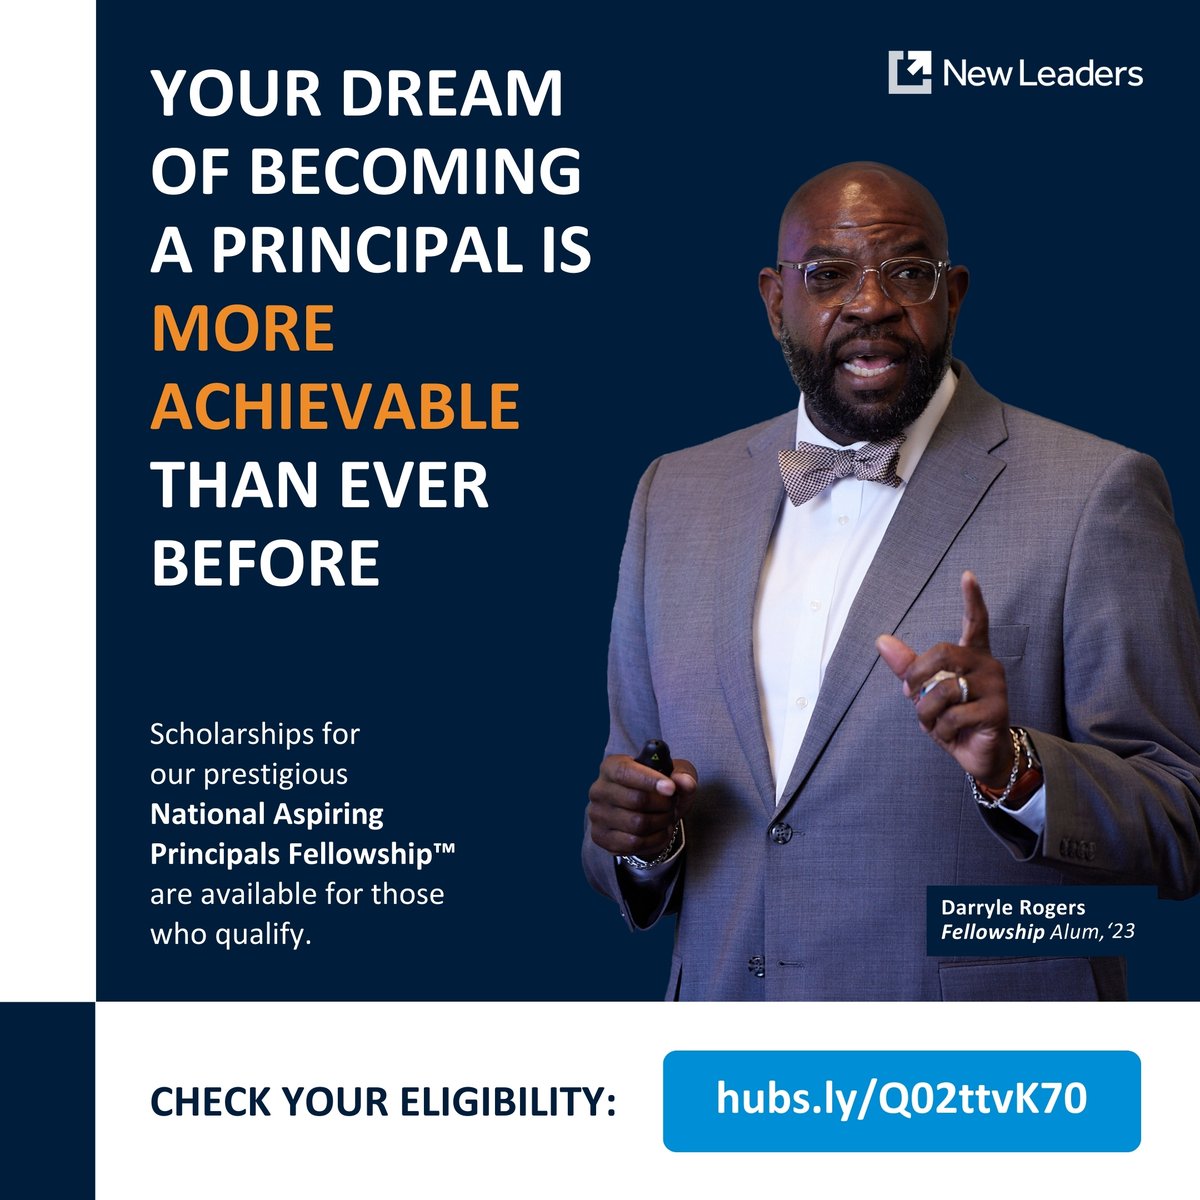 The National Aspiring Principals Fellowship™ is your pathway to principalship—and scholarships are available for those who qualify! At New Leaders, we’re committed to empowering educators to become impactful principals. Check your eligibility: hubs.ly/Q02ttvqS0